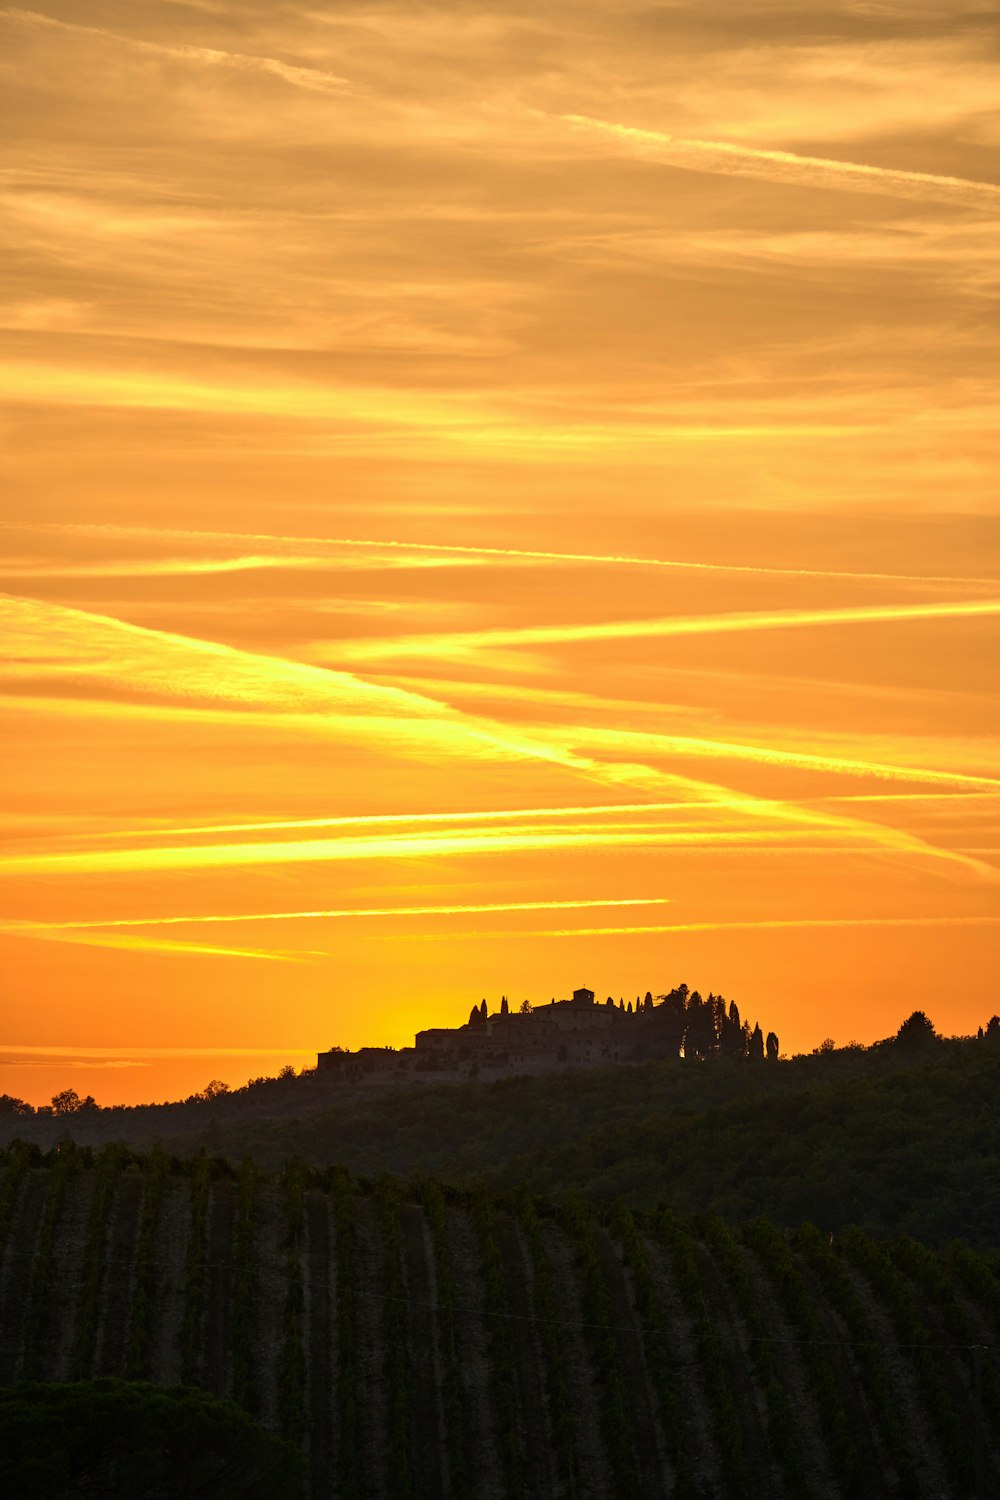 a sunset over a vineyard with a castle in the distance